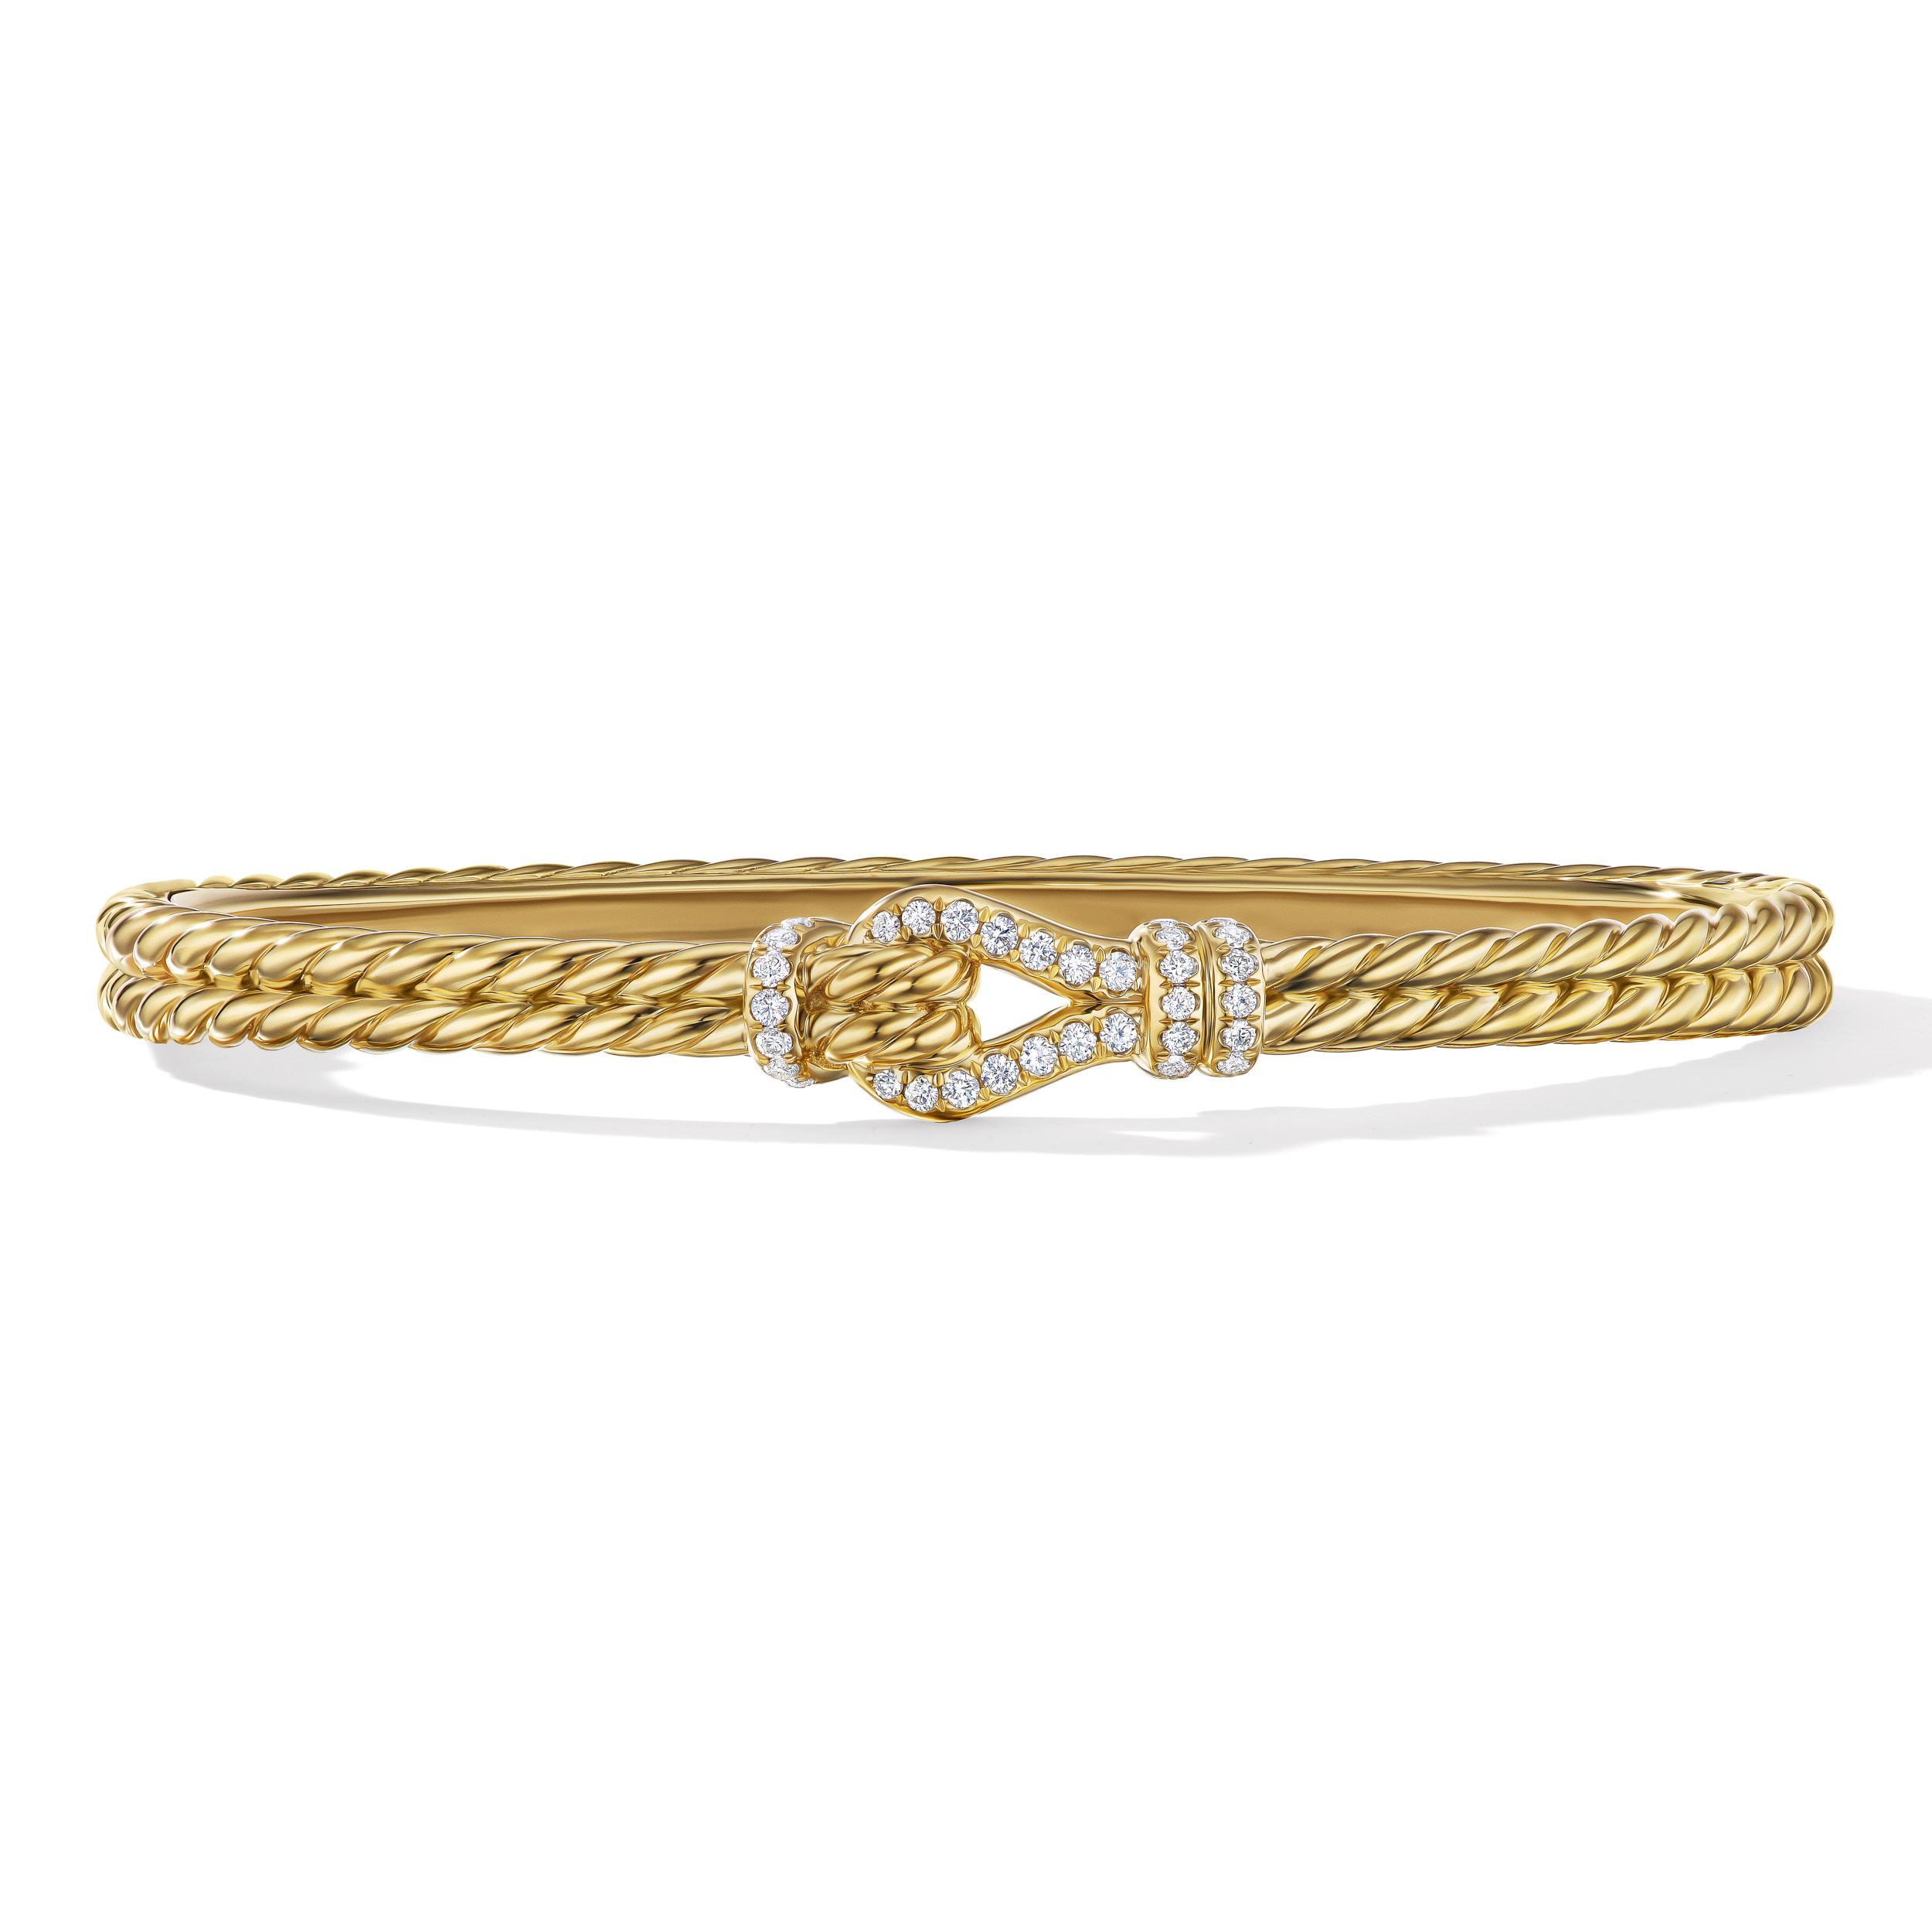 Bracelet FRED Force 10 - Pre-owned Bracelet Yellow Gold